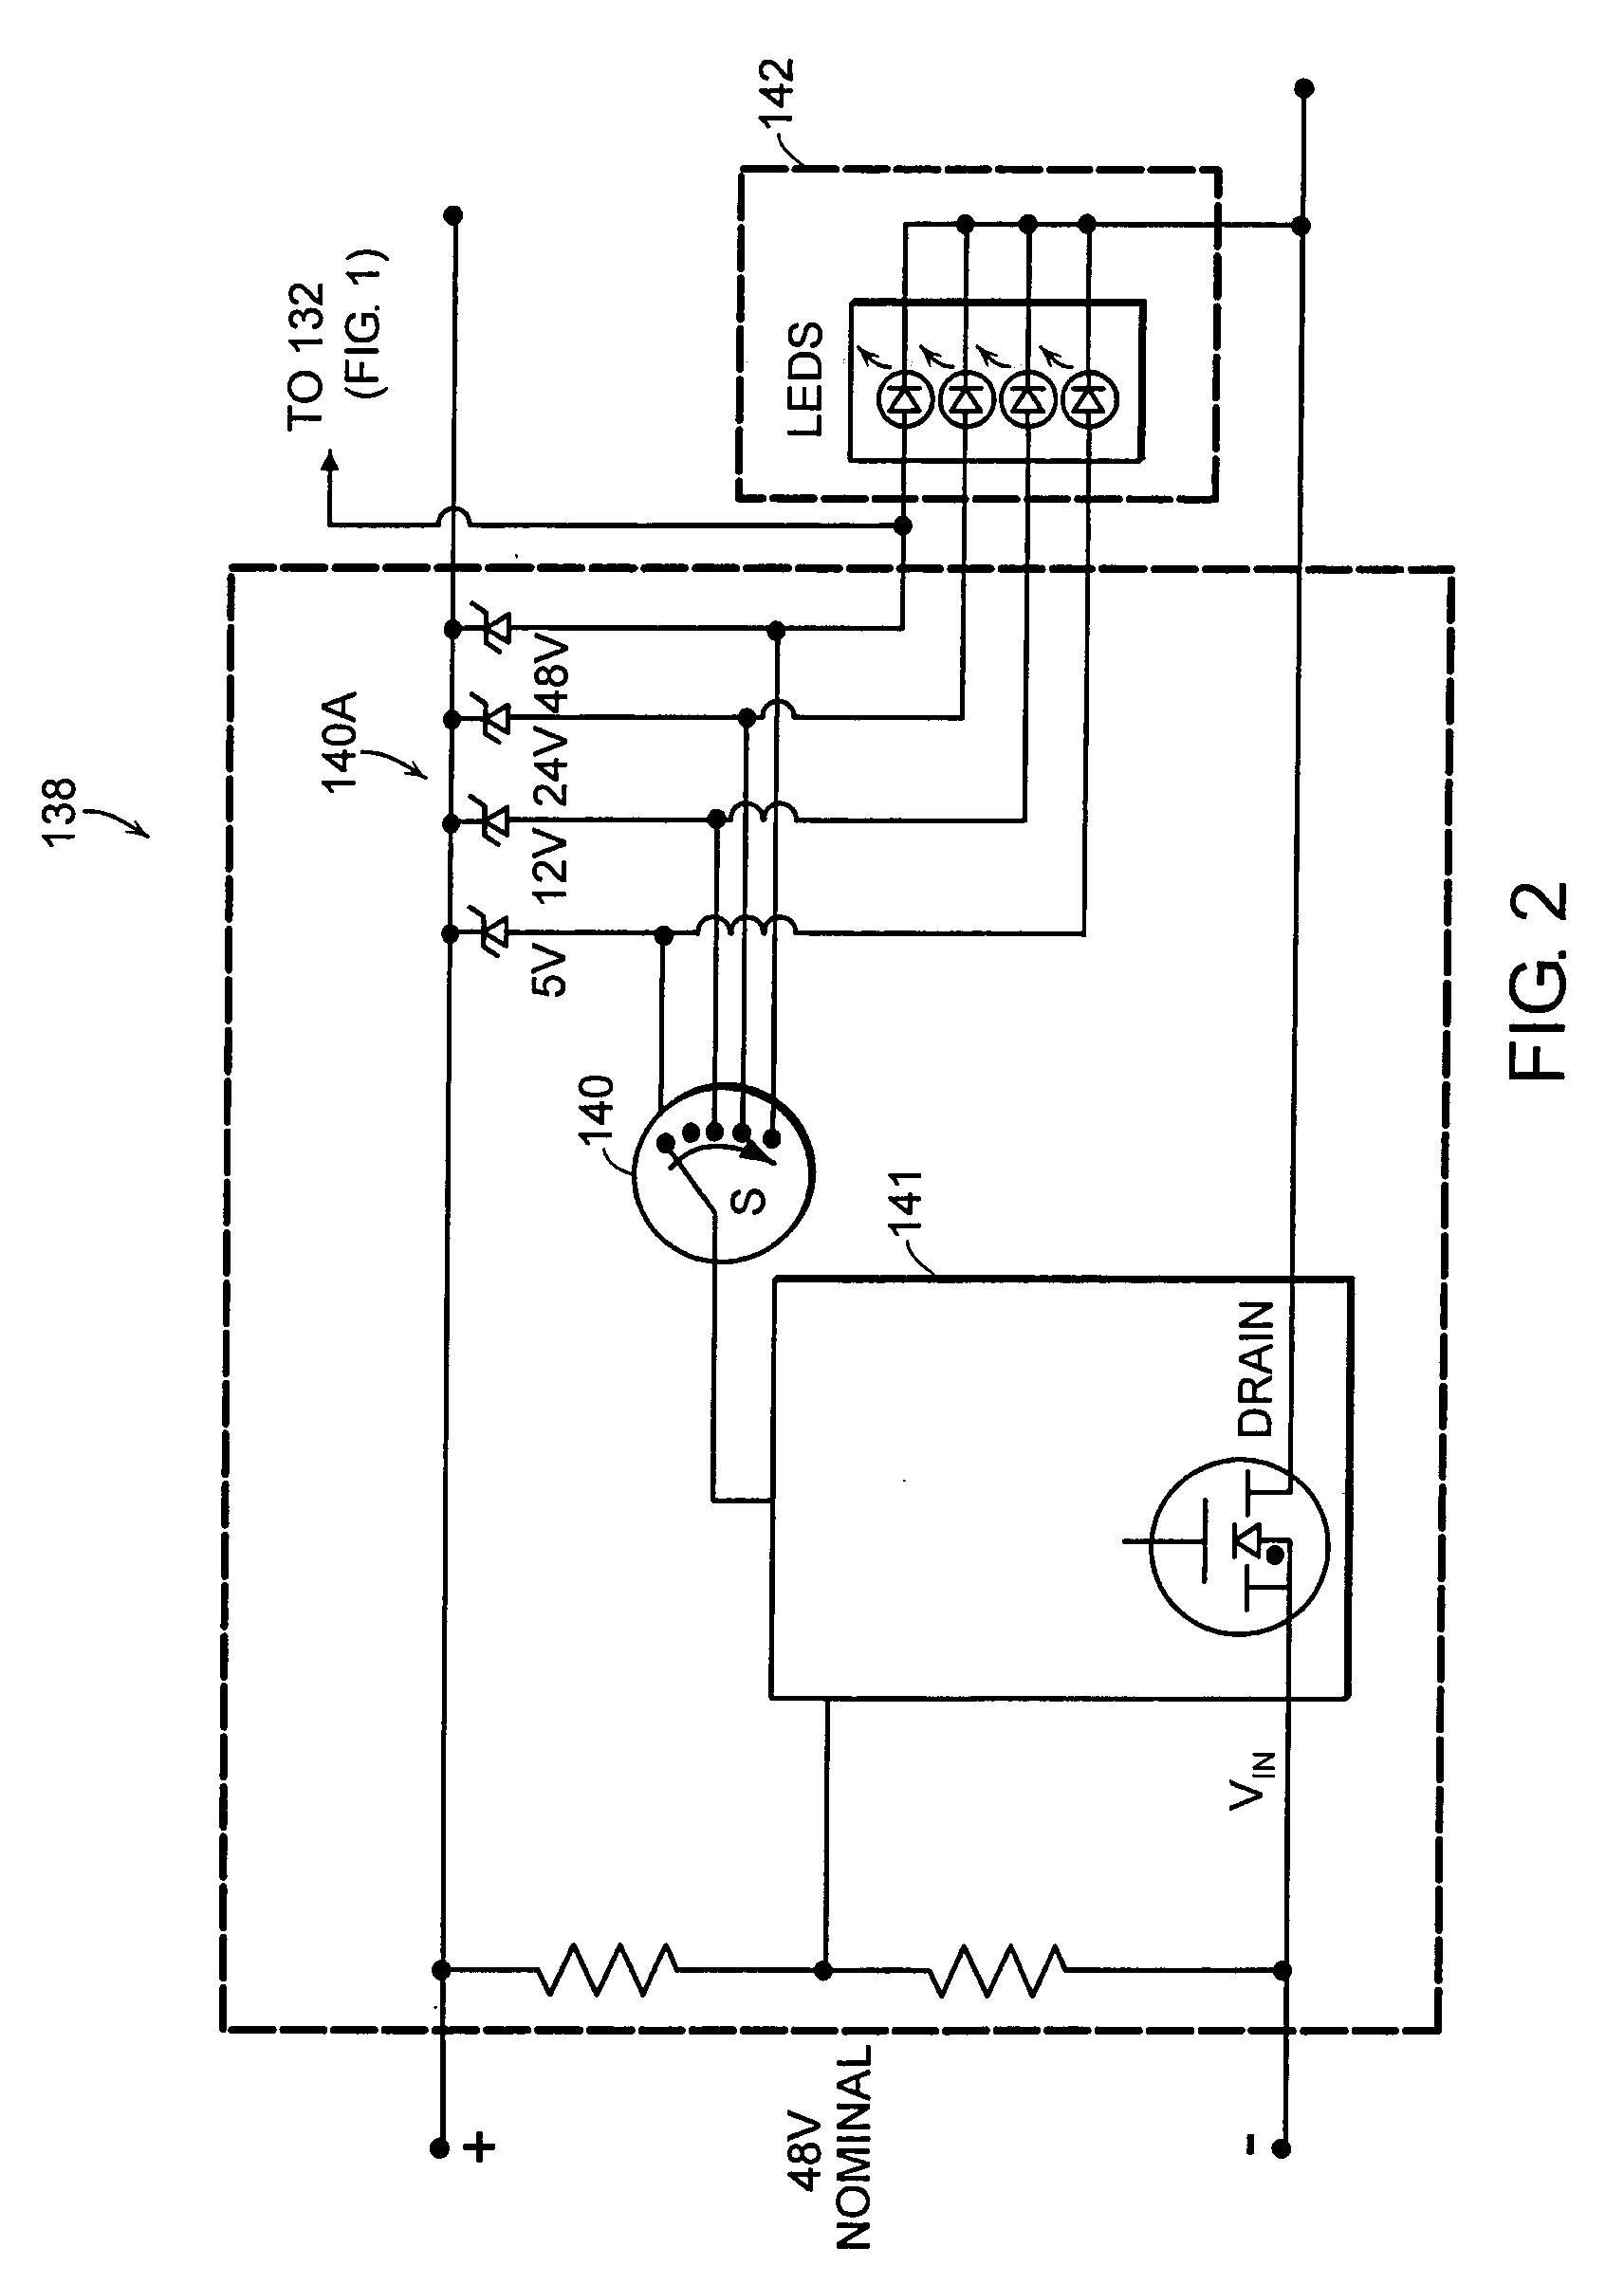 Transceiver apparatus and method having ethernet-over-power and power-over-ethernet capability